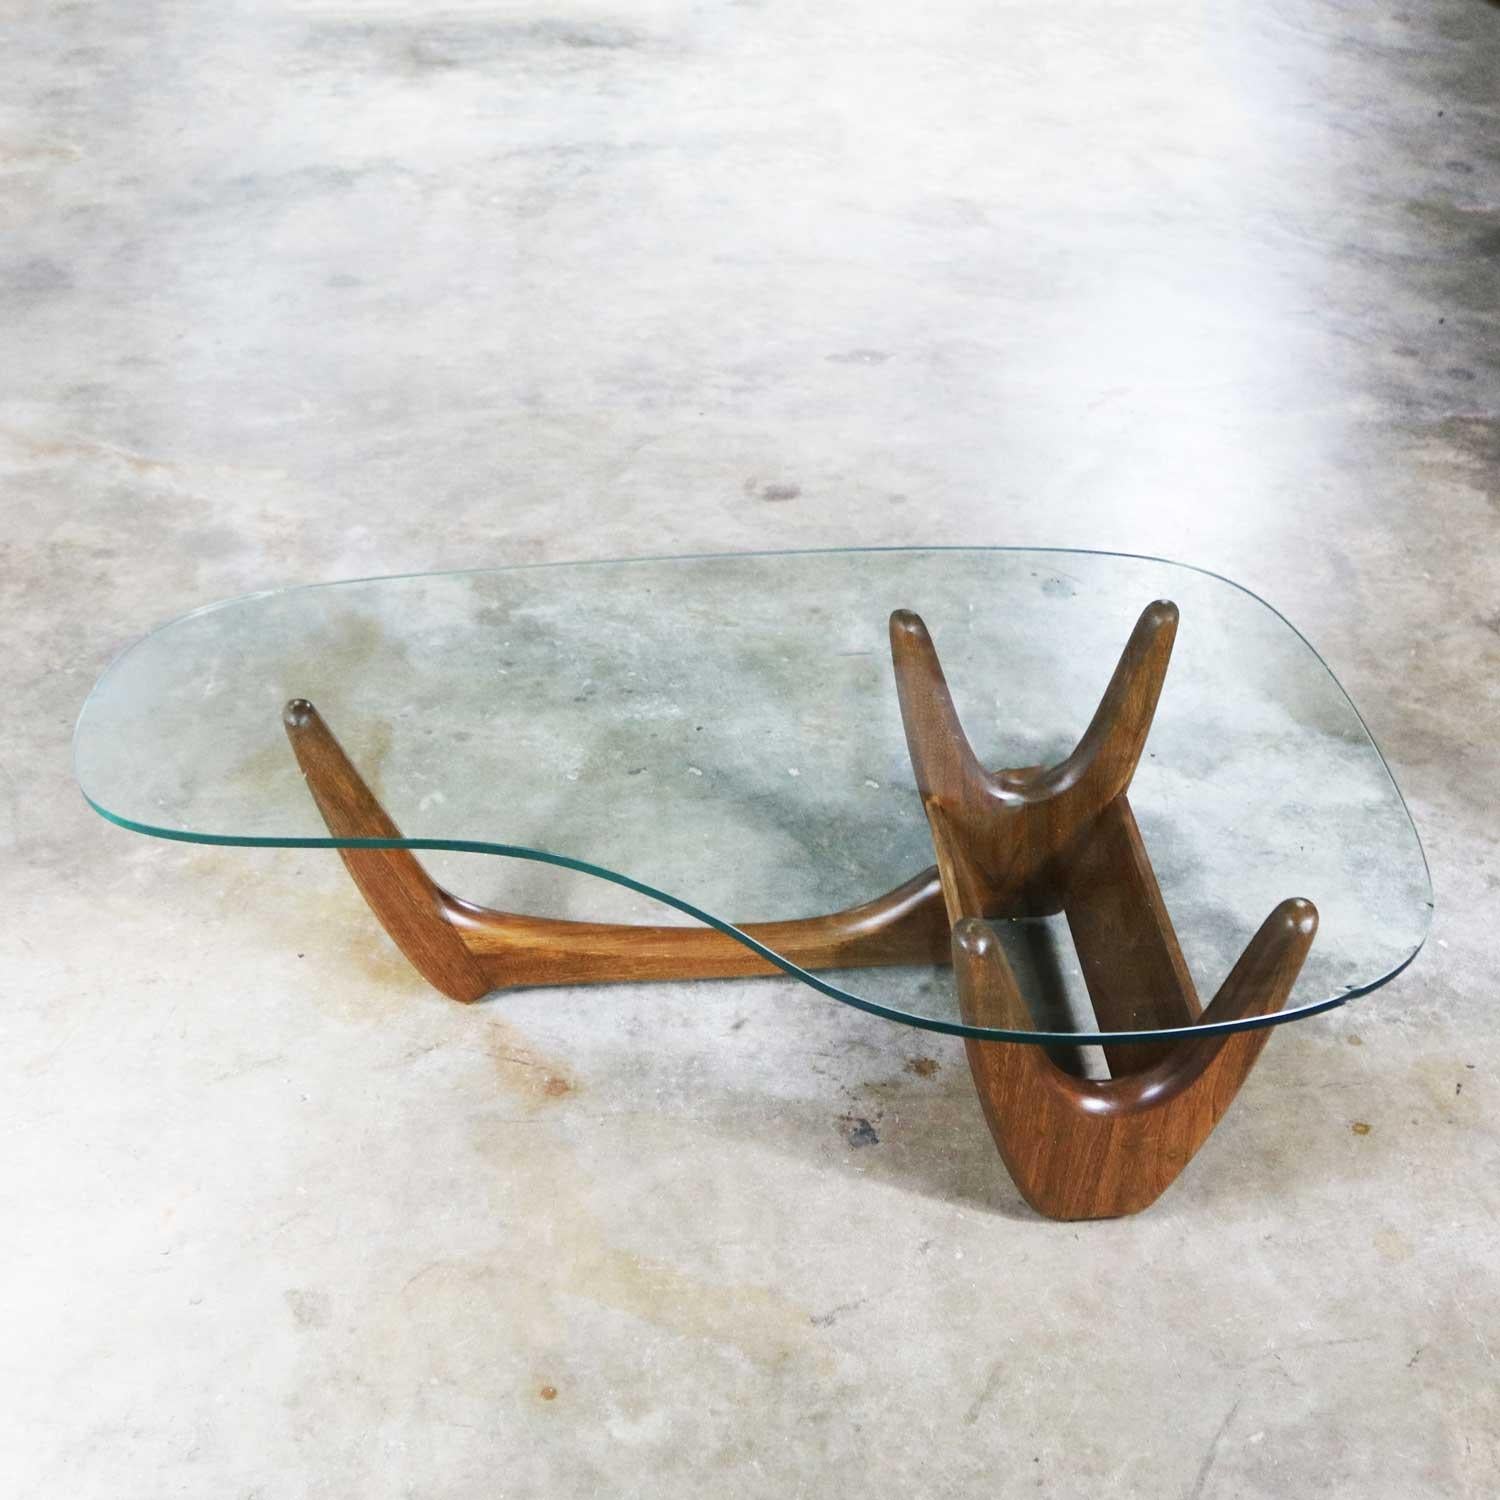 Handsome biomorphic glass topped Mid-Century Modern coffee table which is attributed to Kroehler or Tonk furniture manufacturers. The base has been professionally restored and is gorgeous. But the original kidney shaped glass has seen better days